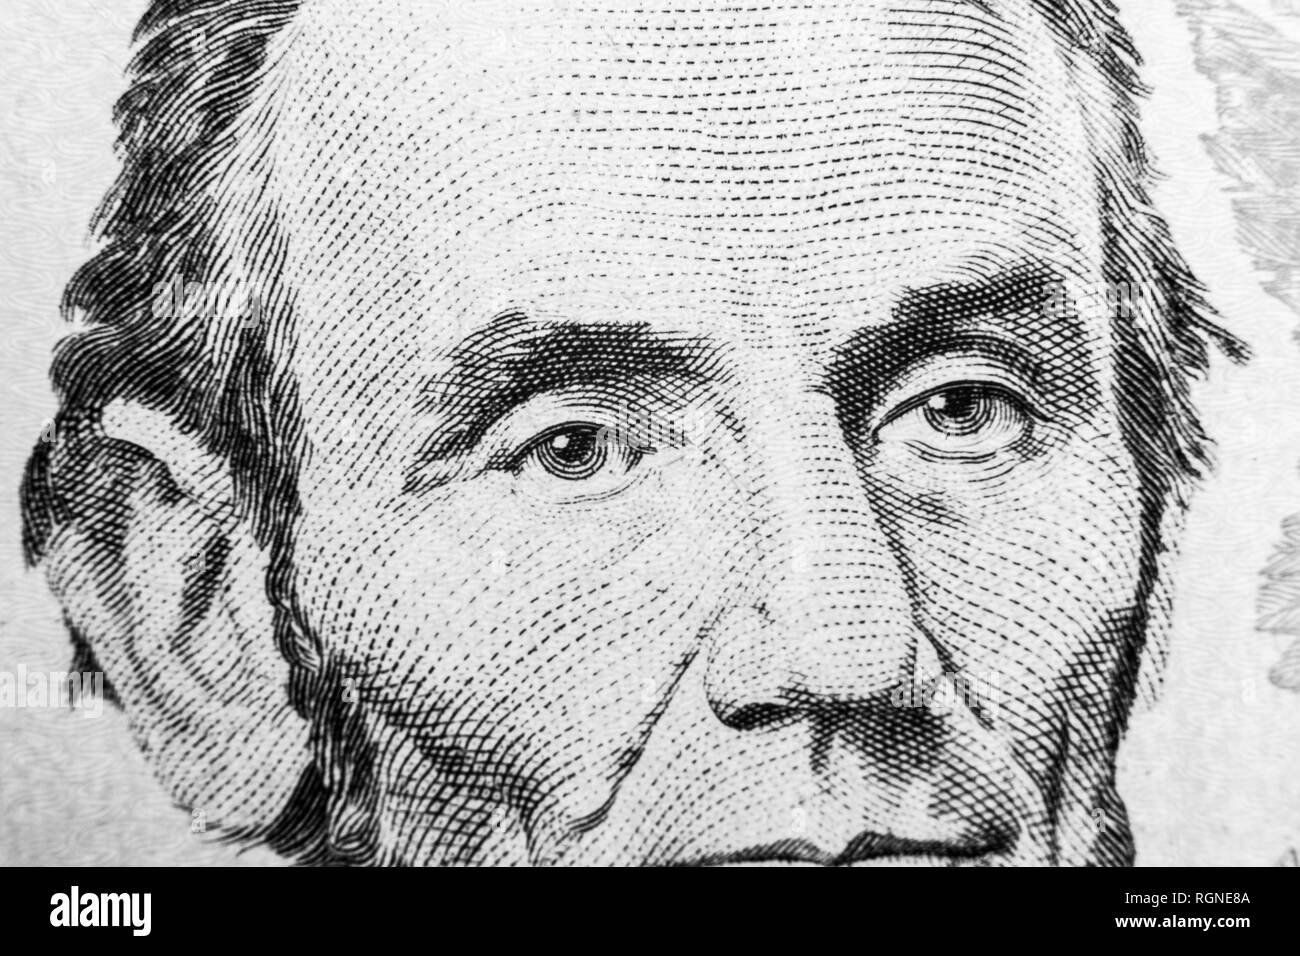 Five dollar bill Black and White Stock Photos & Images - Alamy